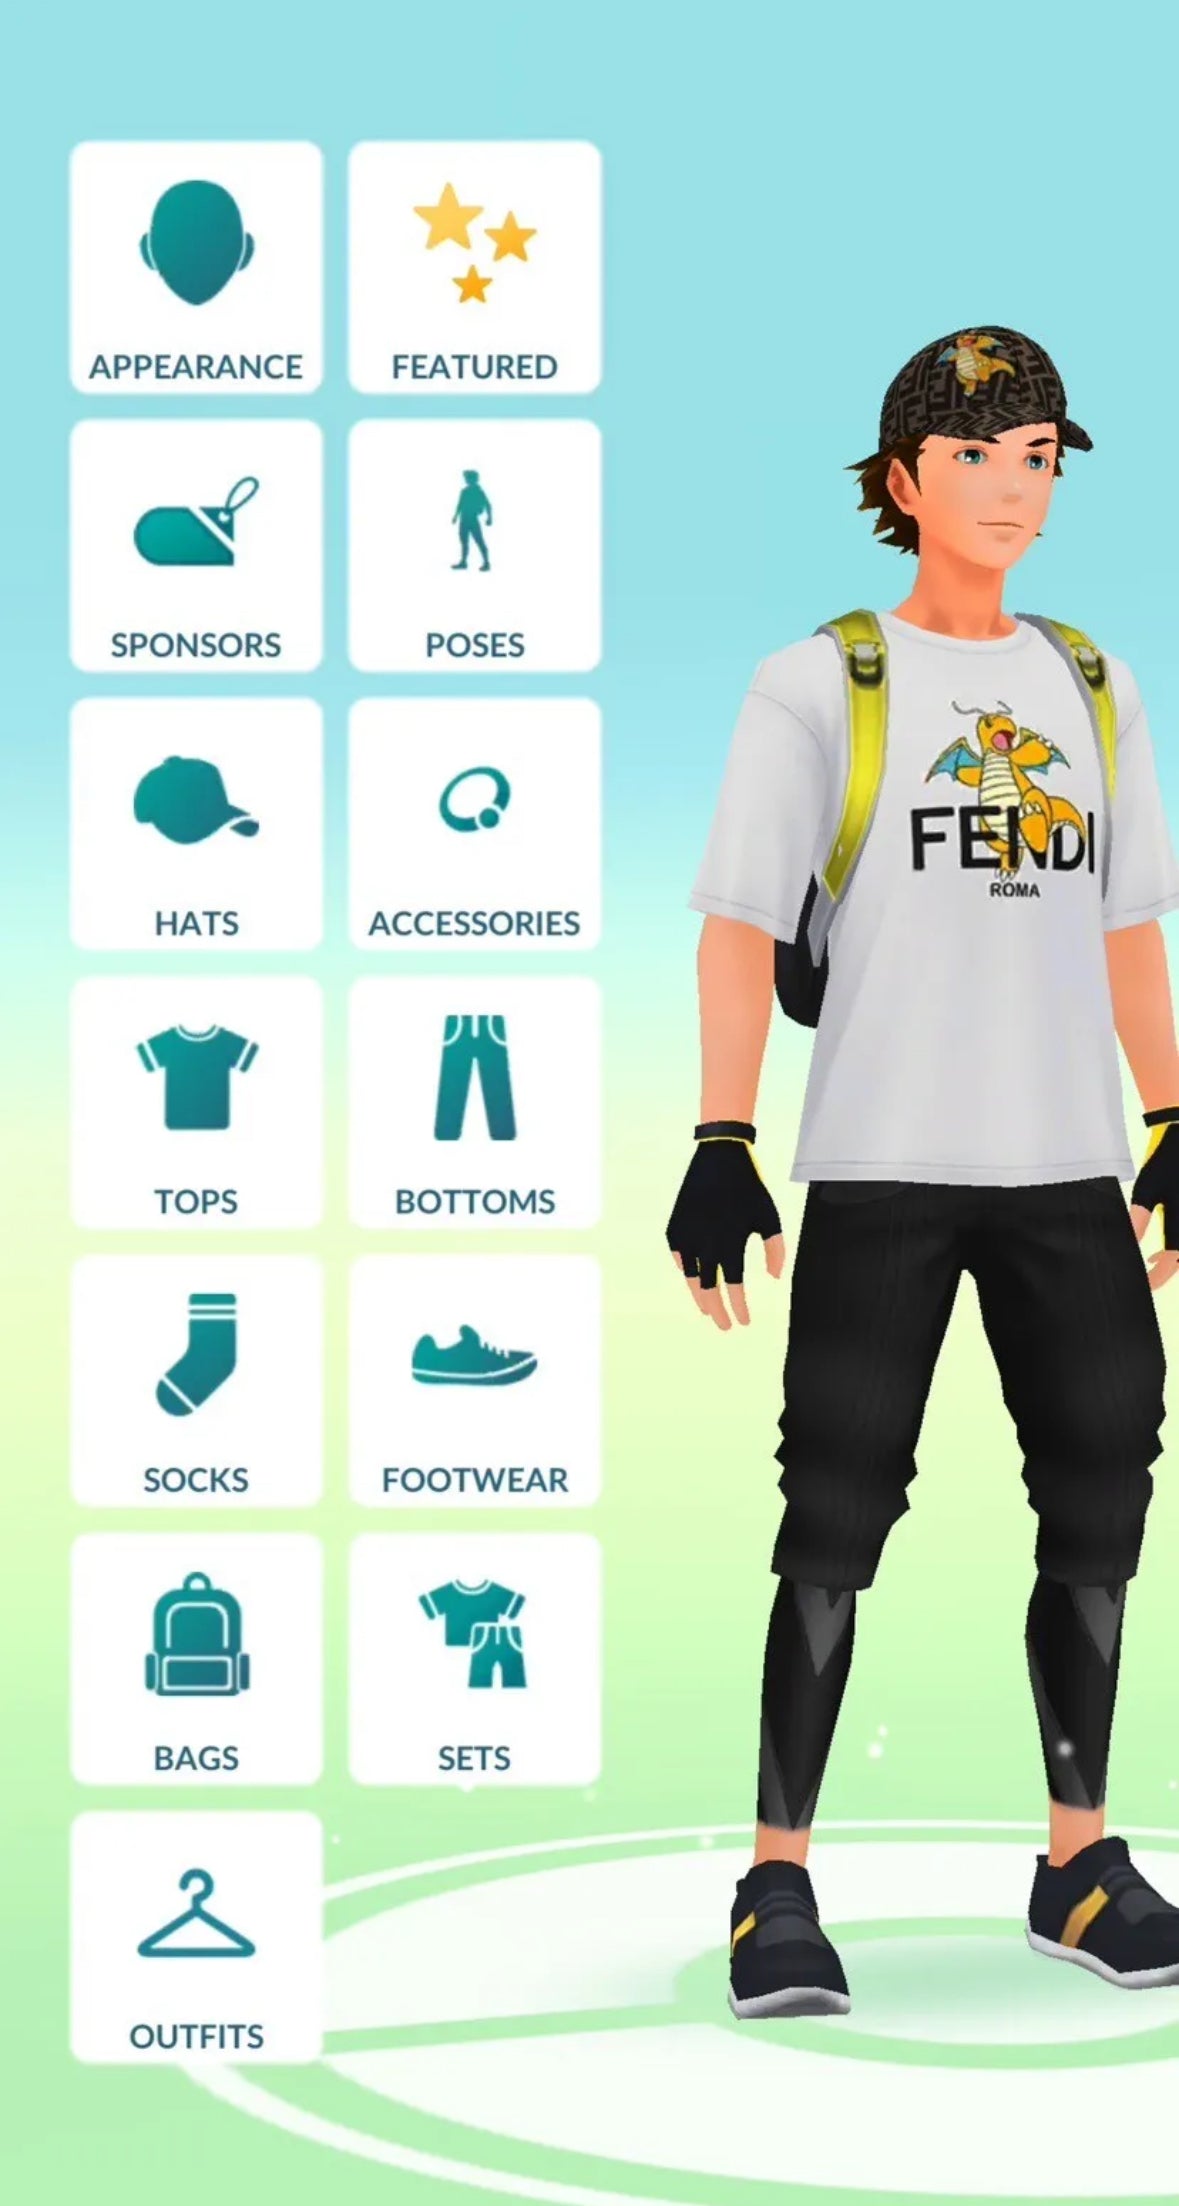 Fendi outfit added to your account